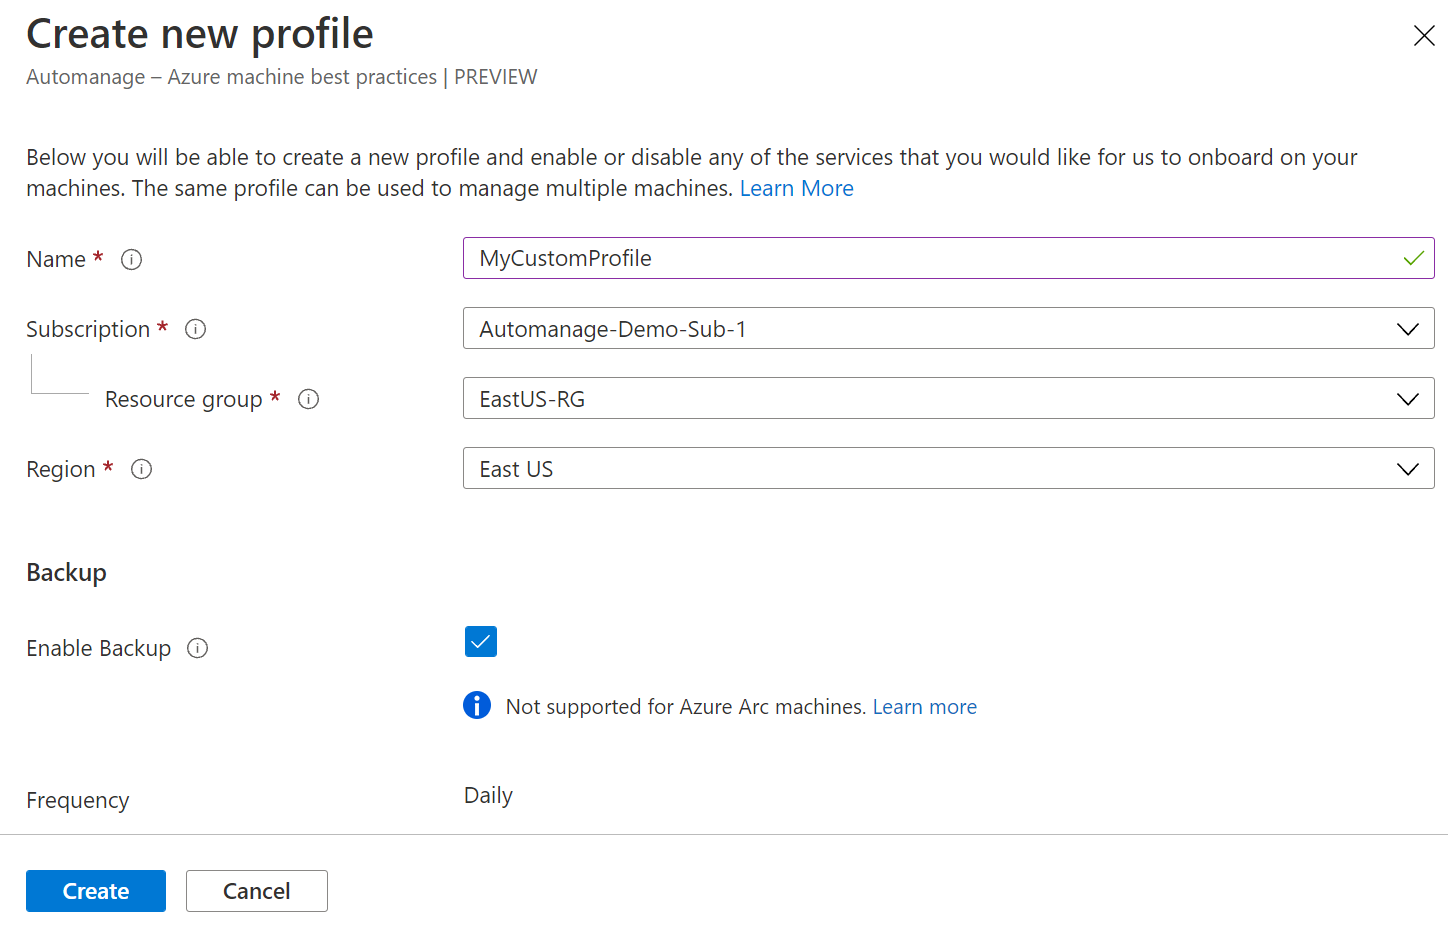 Fill out custom profile details.